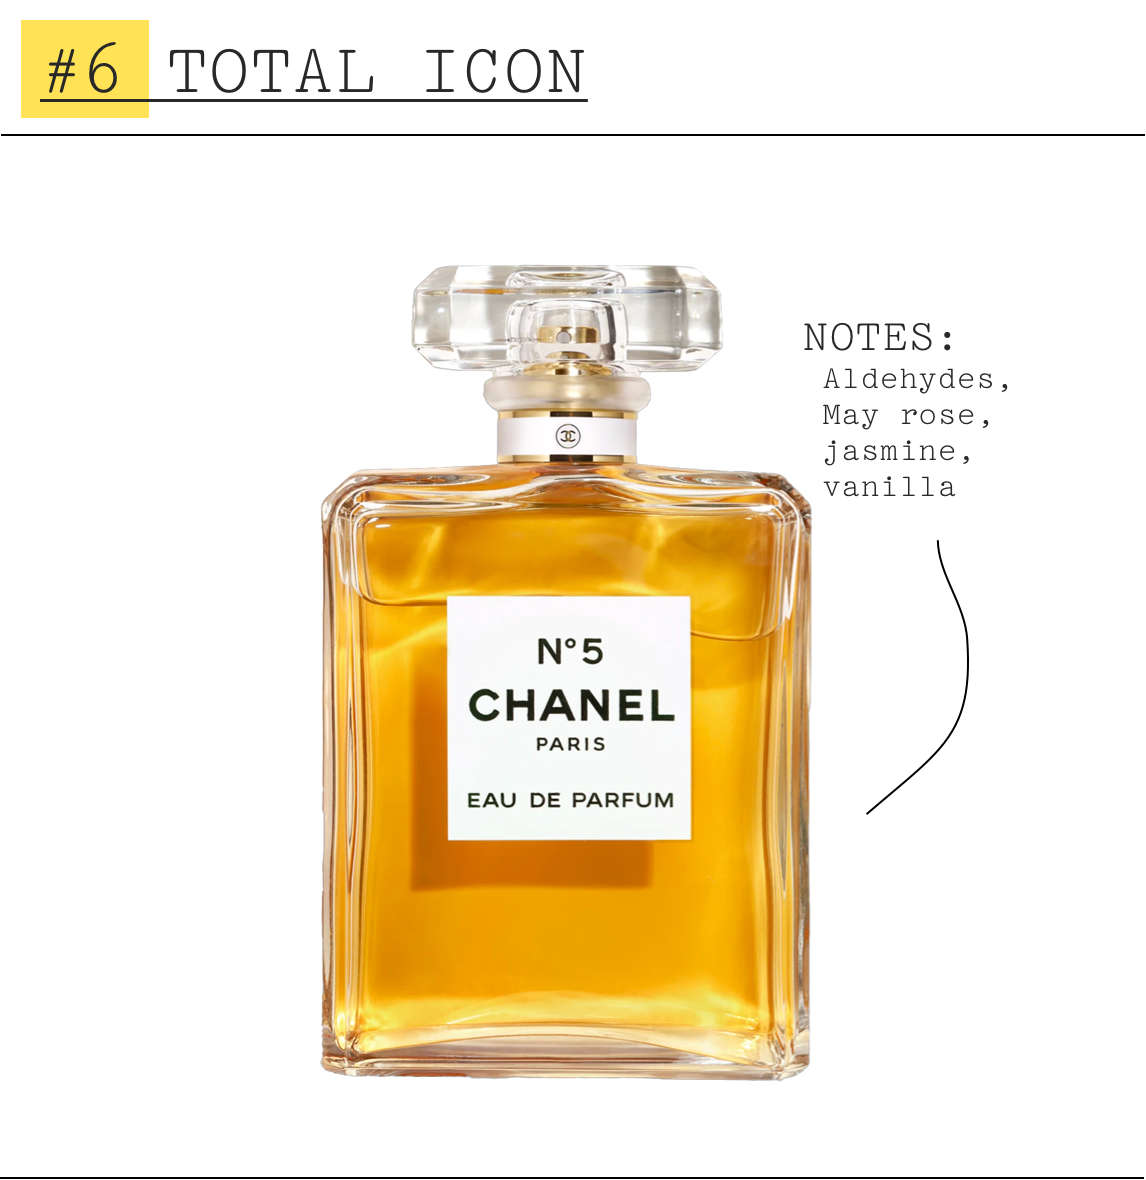 Who Makes Fragrances And Owns The Most Popular Designer Perfume